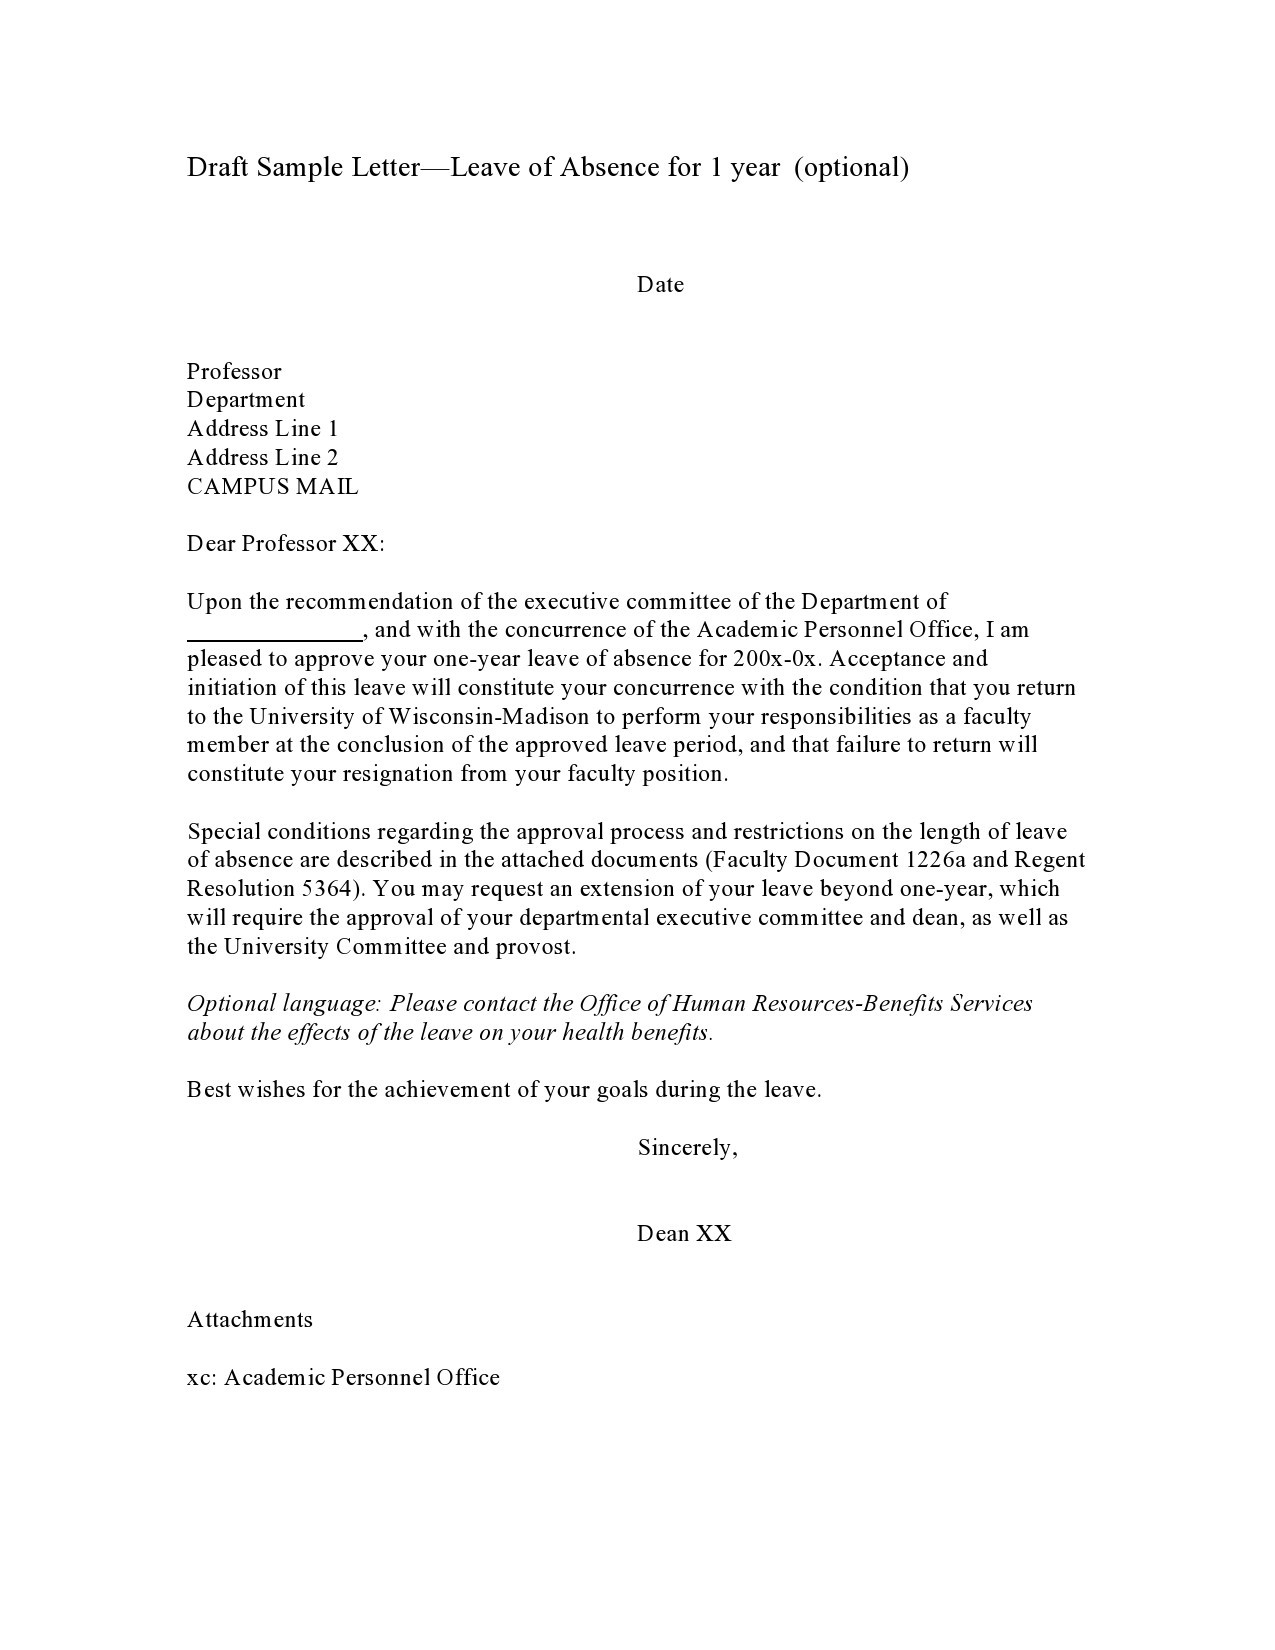 Sample Of Leave Of Absence Letter To Employer from templatelab.com